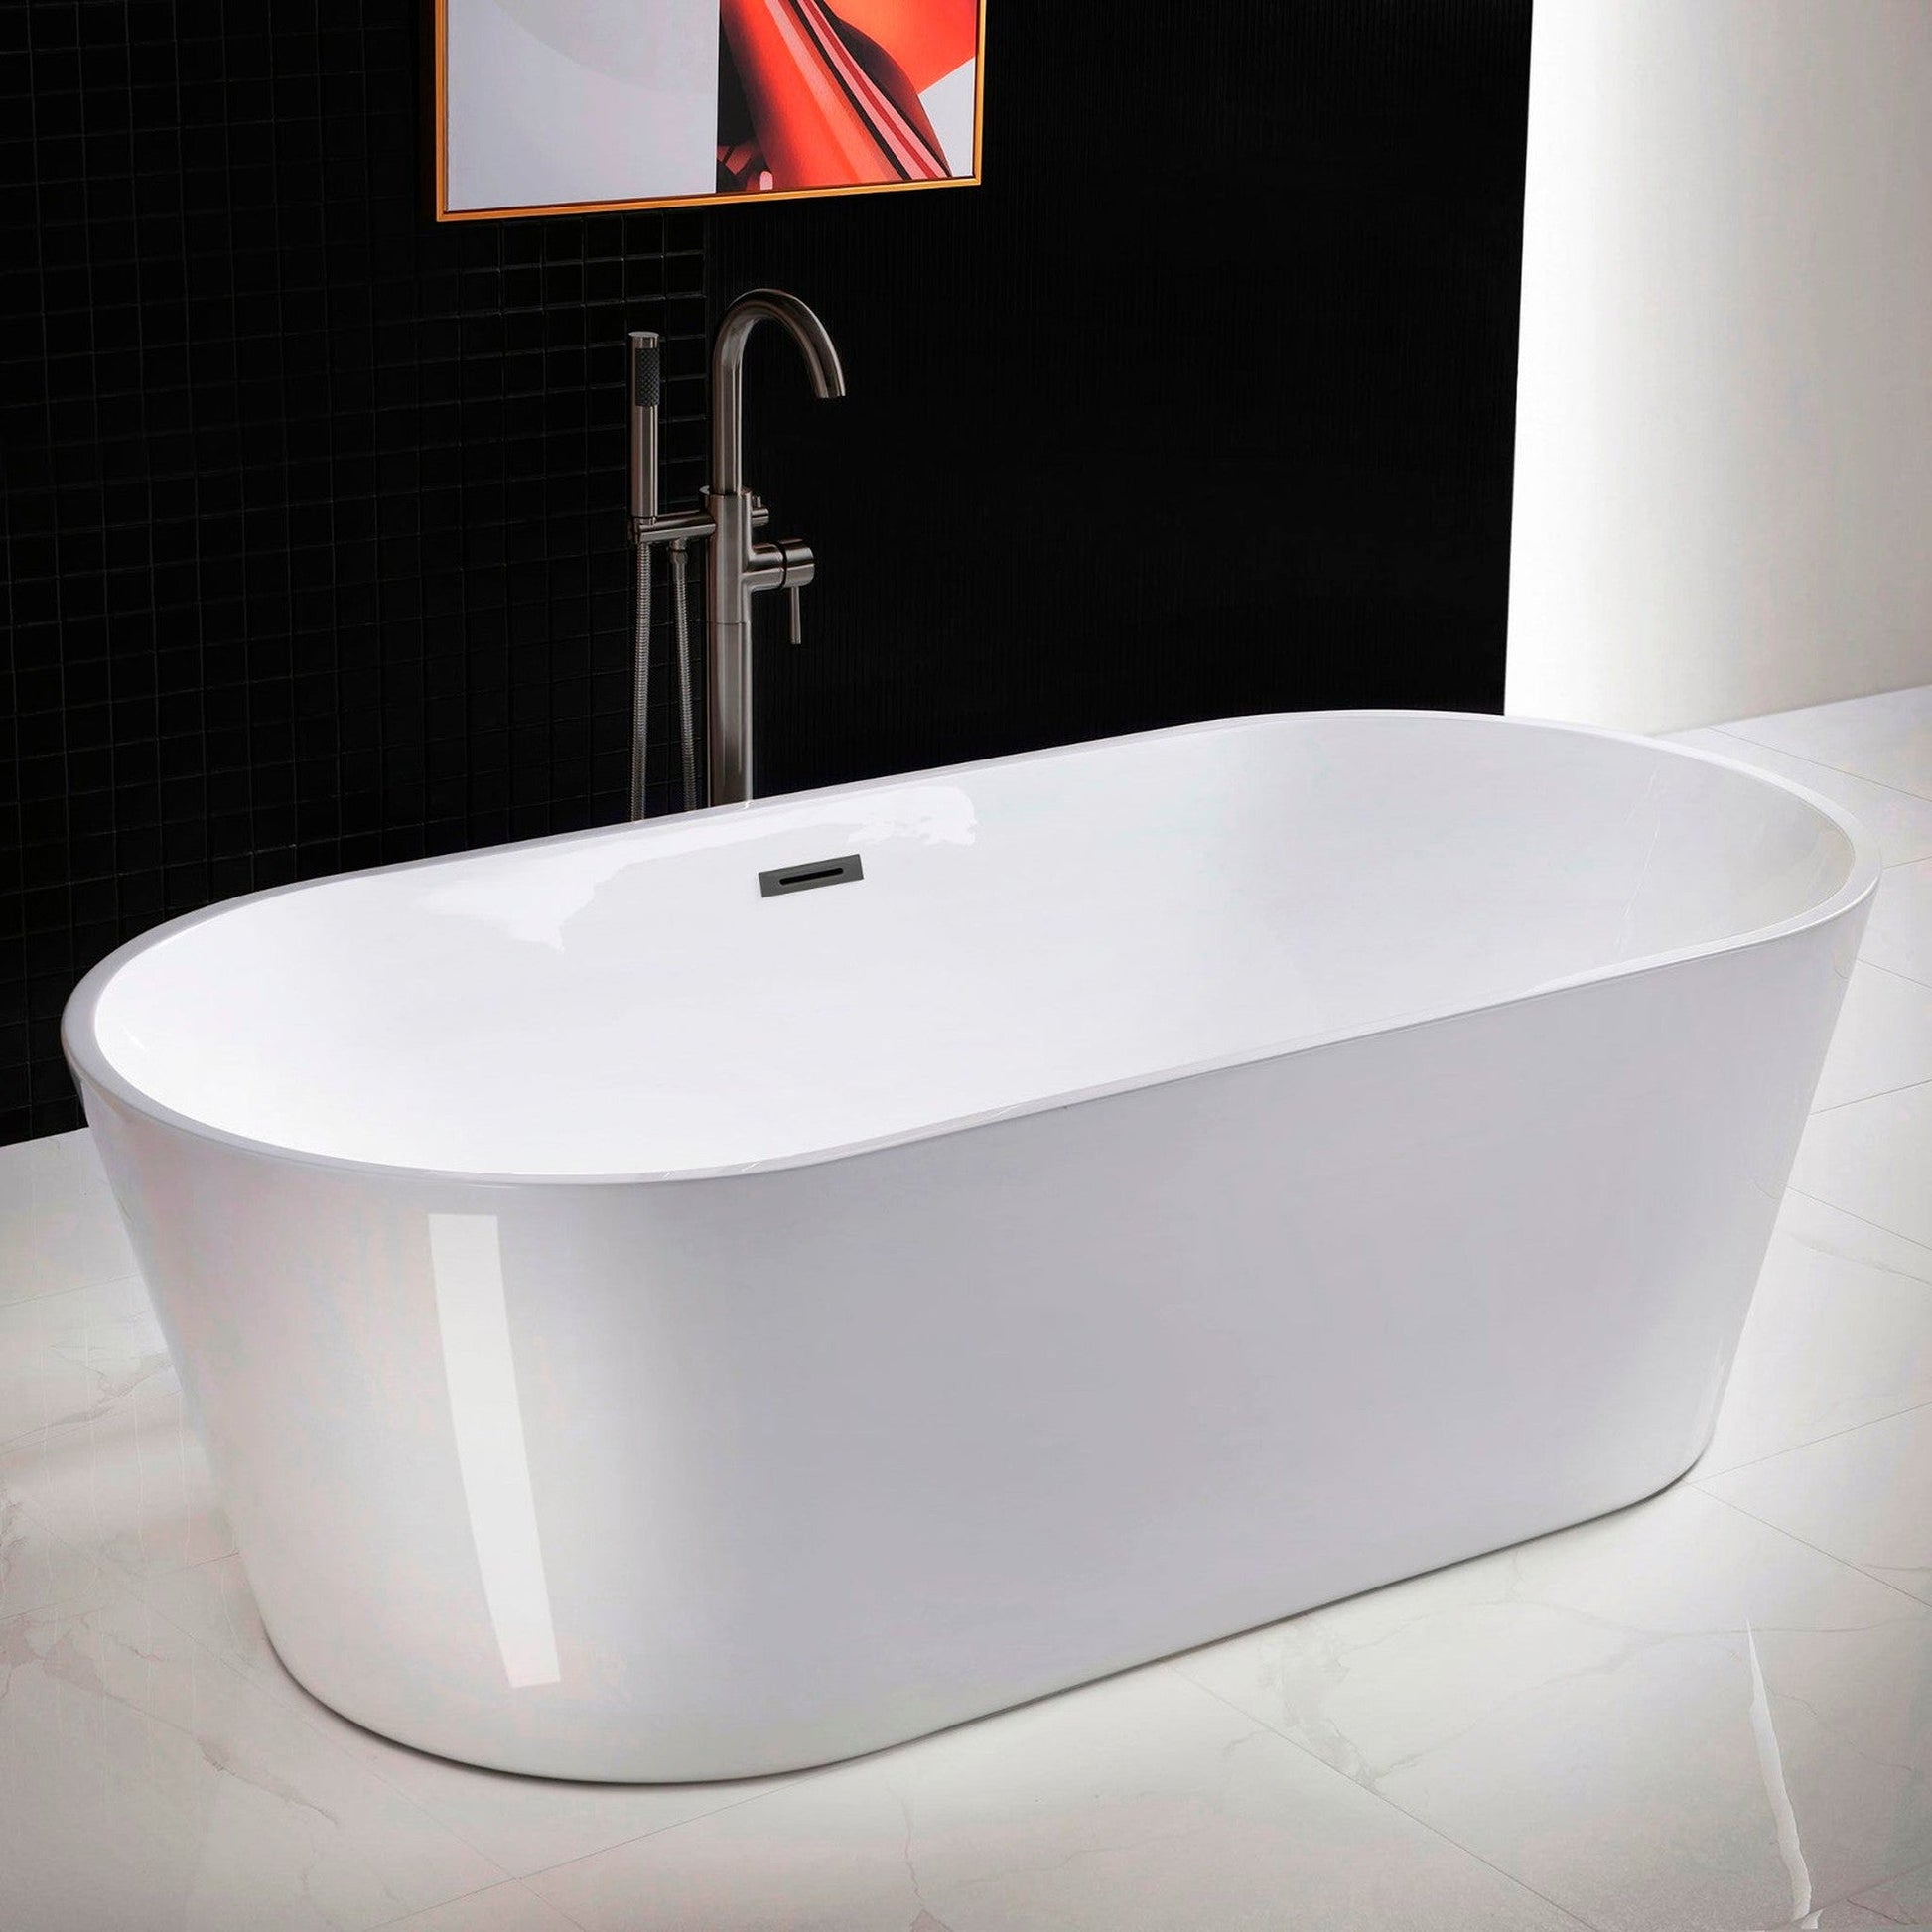 WoodBridge 71" White Acrylic Freestanding Contemporary Soaking Bathtub With Matte Black Drain, Overflow, F0025MBRD Tub Filler and Caddy Tray